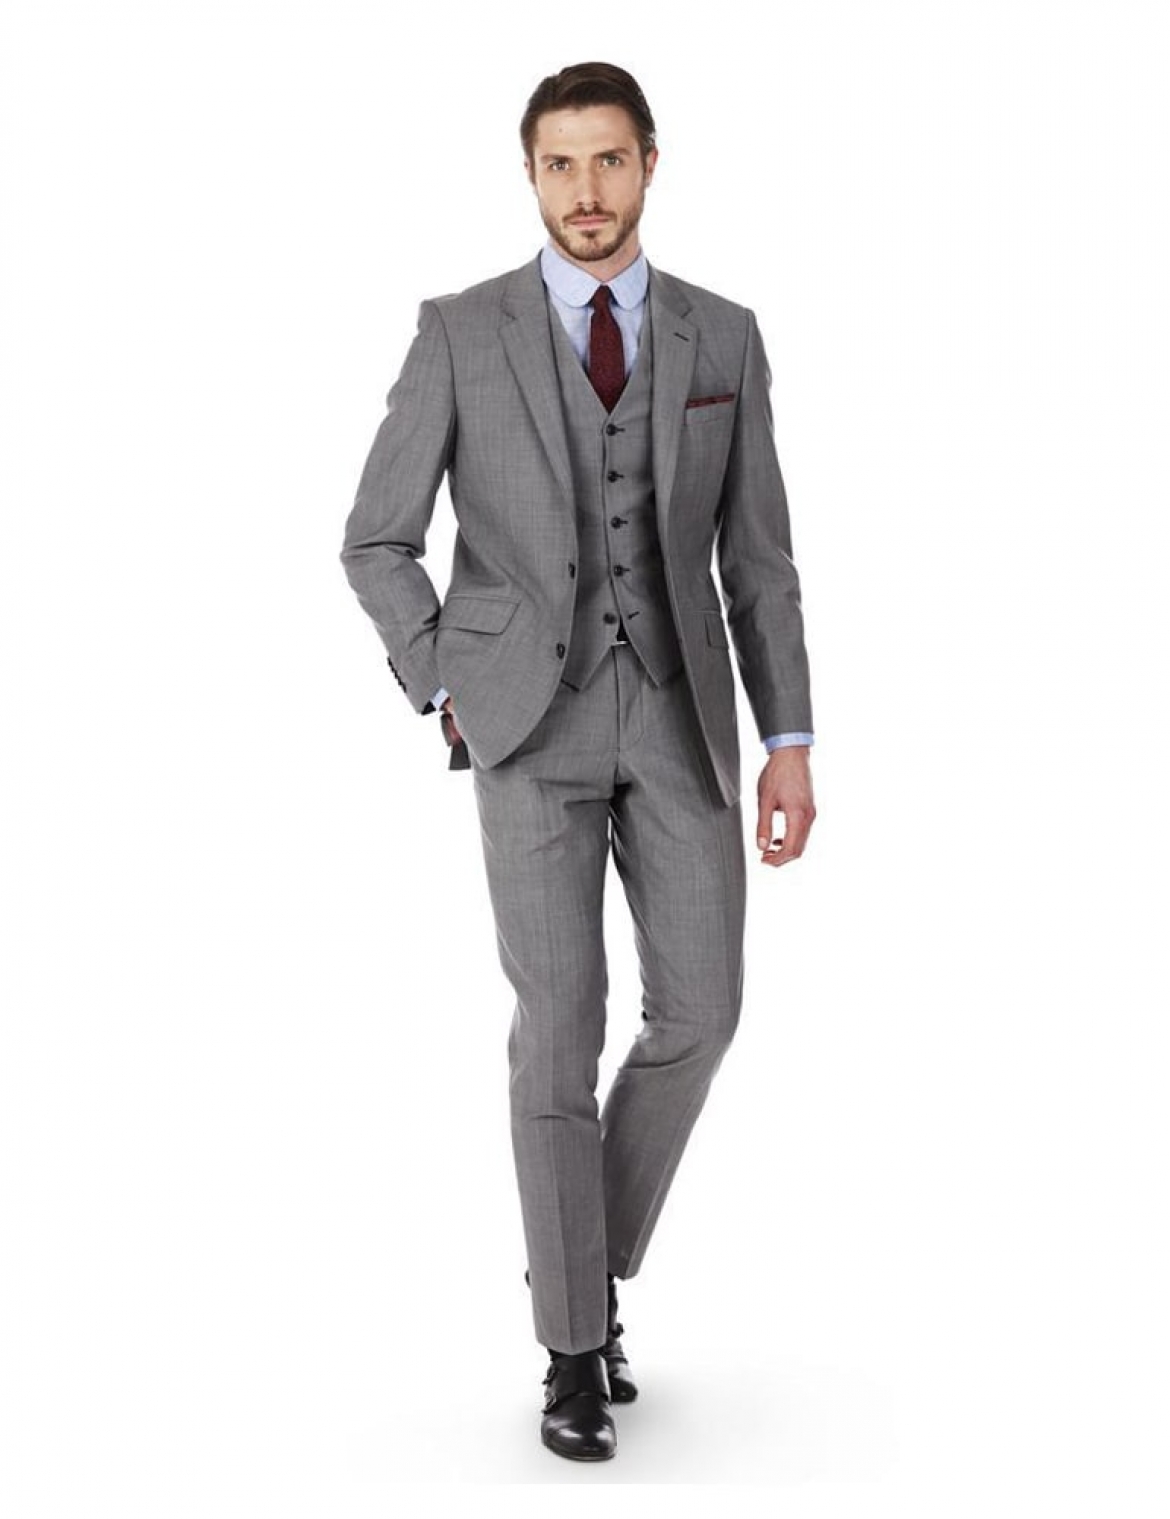 August Taior - Tailored Suits for Men's - Ho Chi Minh - Vietnam